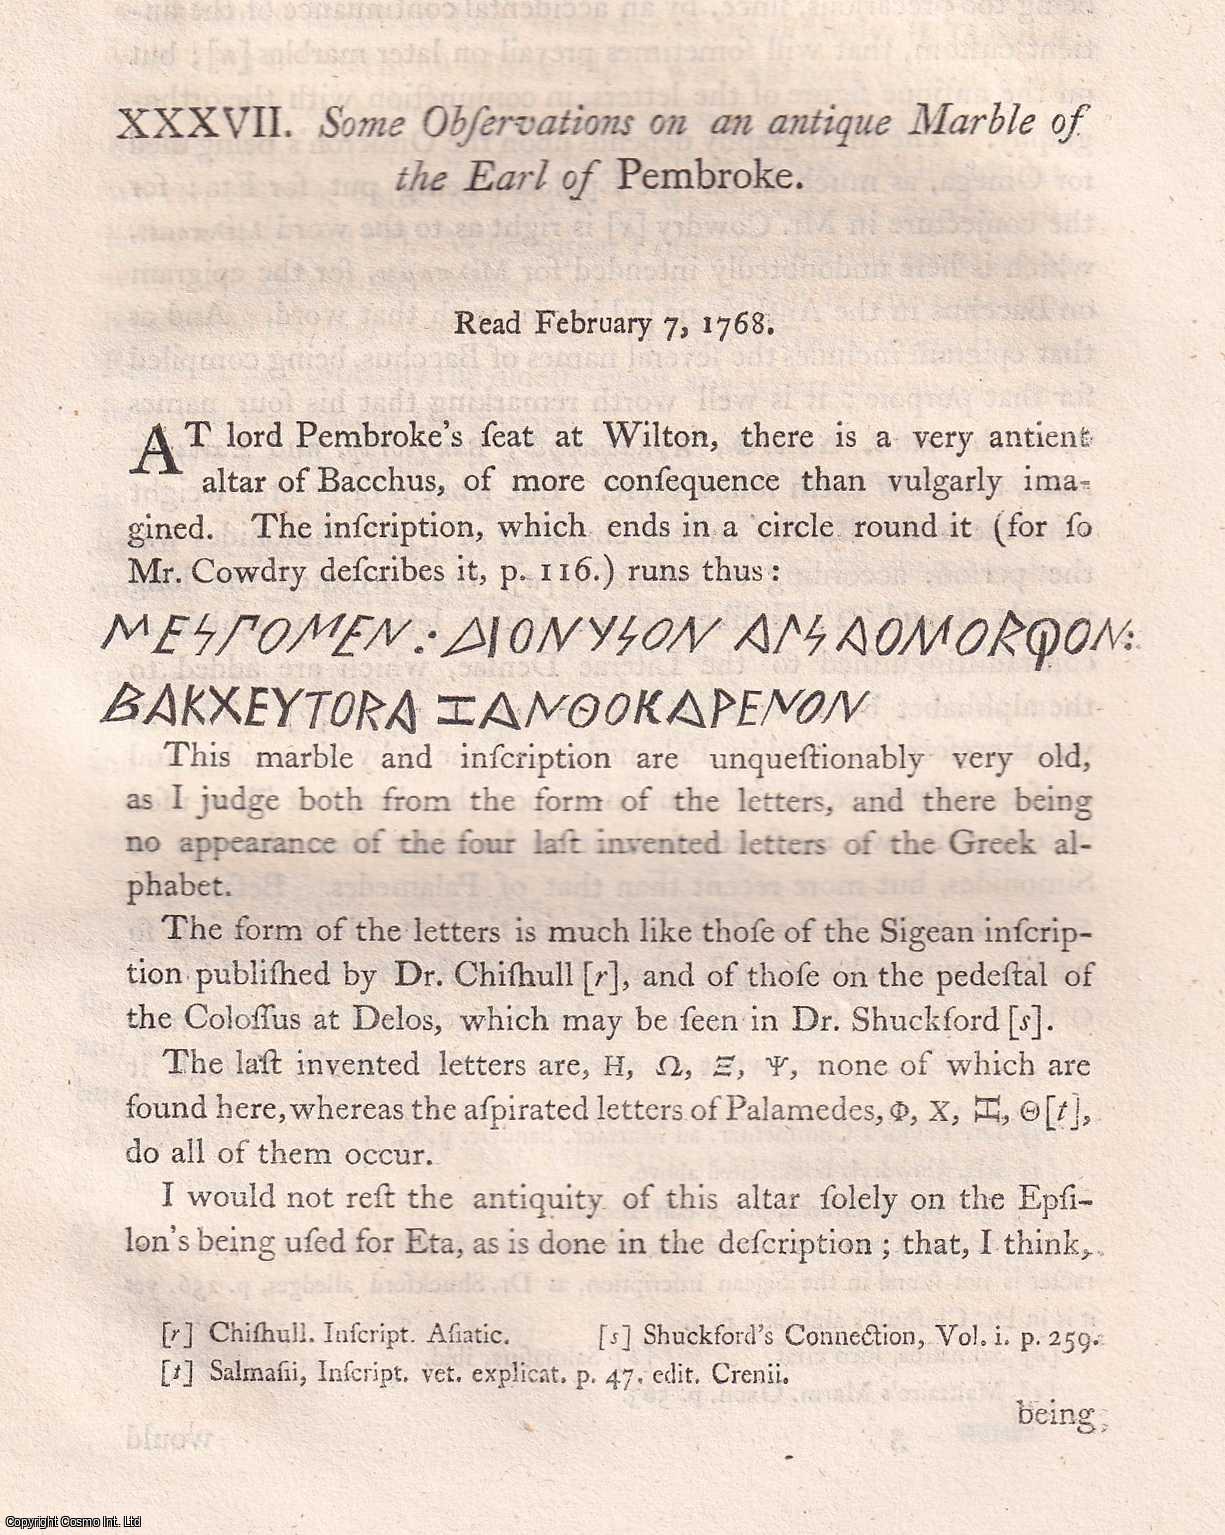 S.P. - Observations on an antique Marble of the Earl of Pembroke An uncommon original article from the journal Archaeologia, 1770.